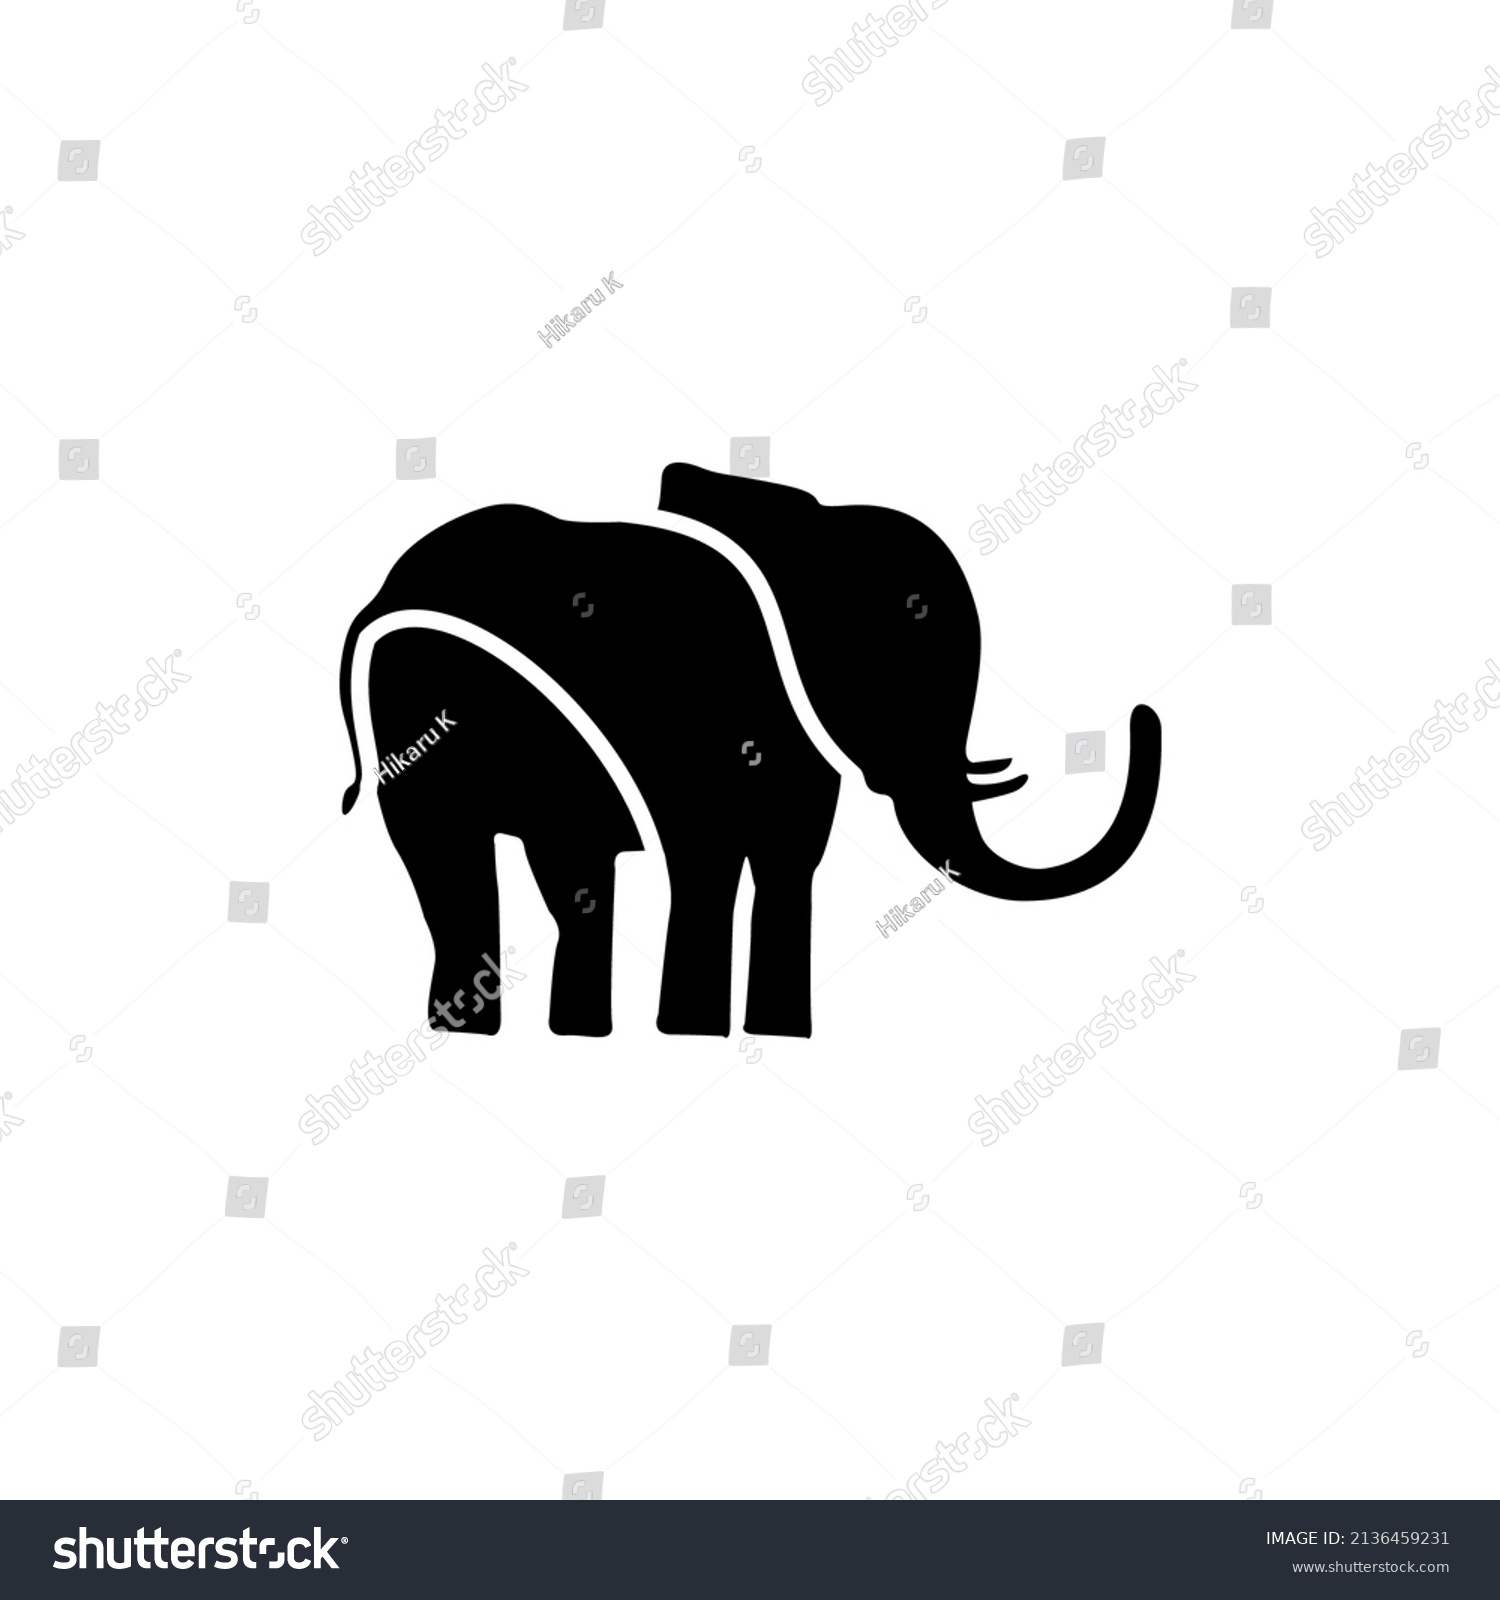 SVG of elephant silhouette with 3 curved lines black and white style that is beautiful and full of meaning svg